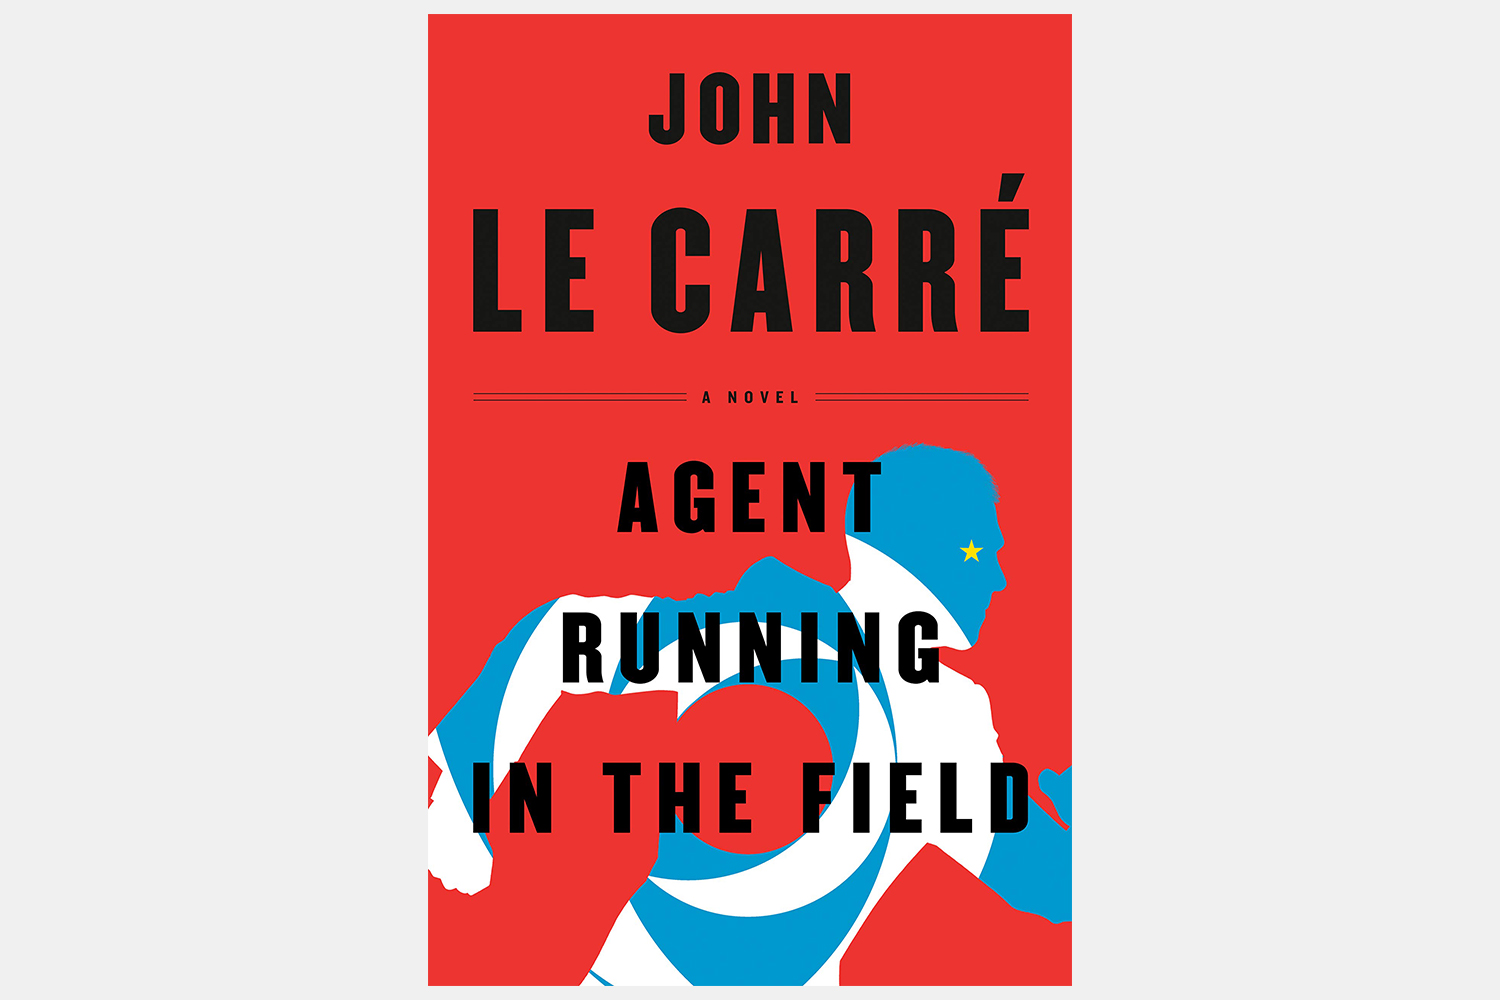 Agent Running in the Field Book John le Carré